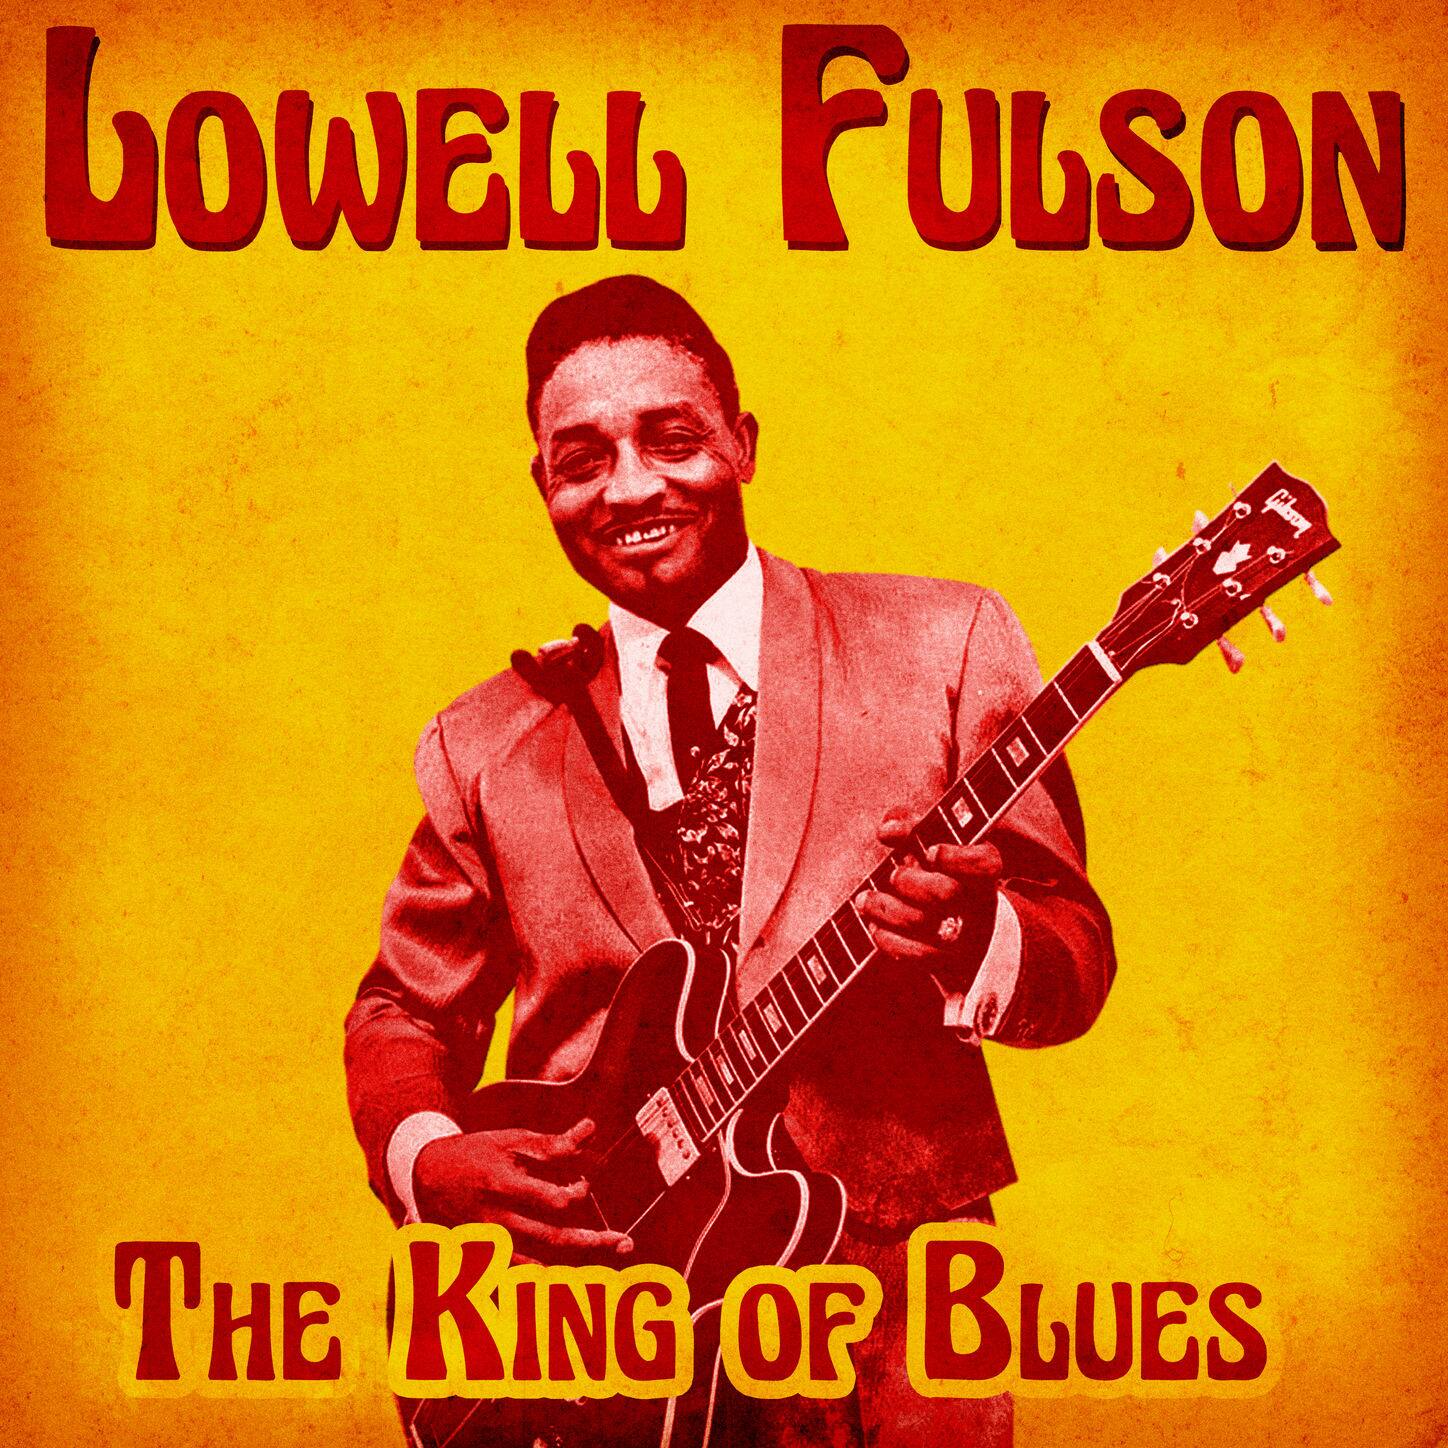 Lowell Fulson Wallpapers